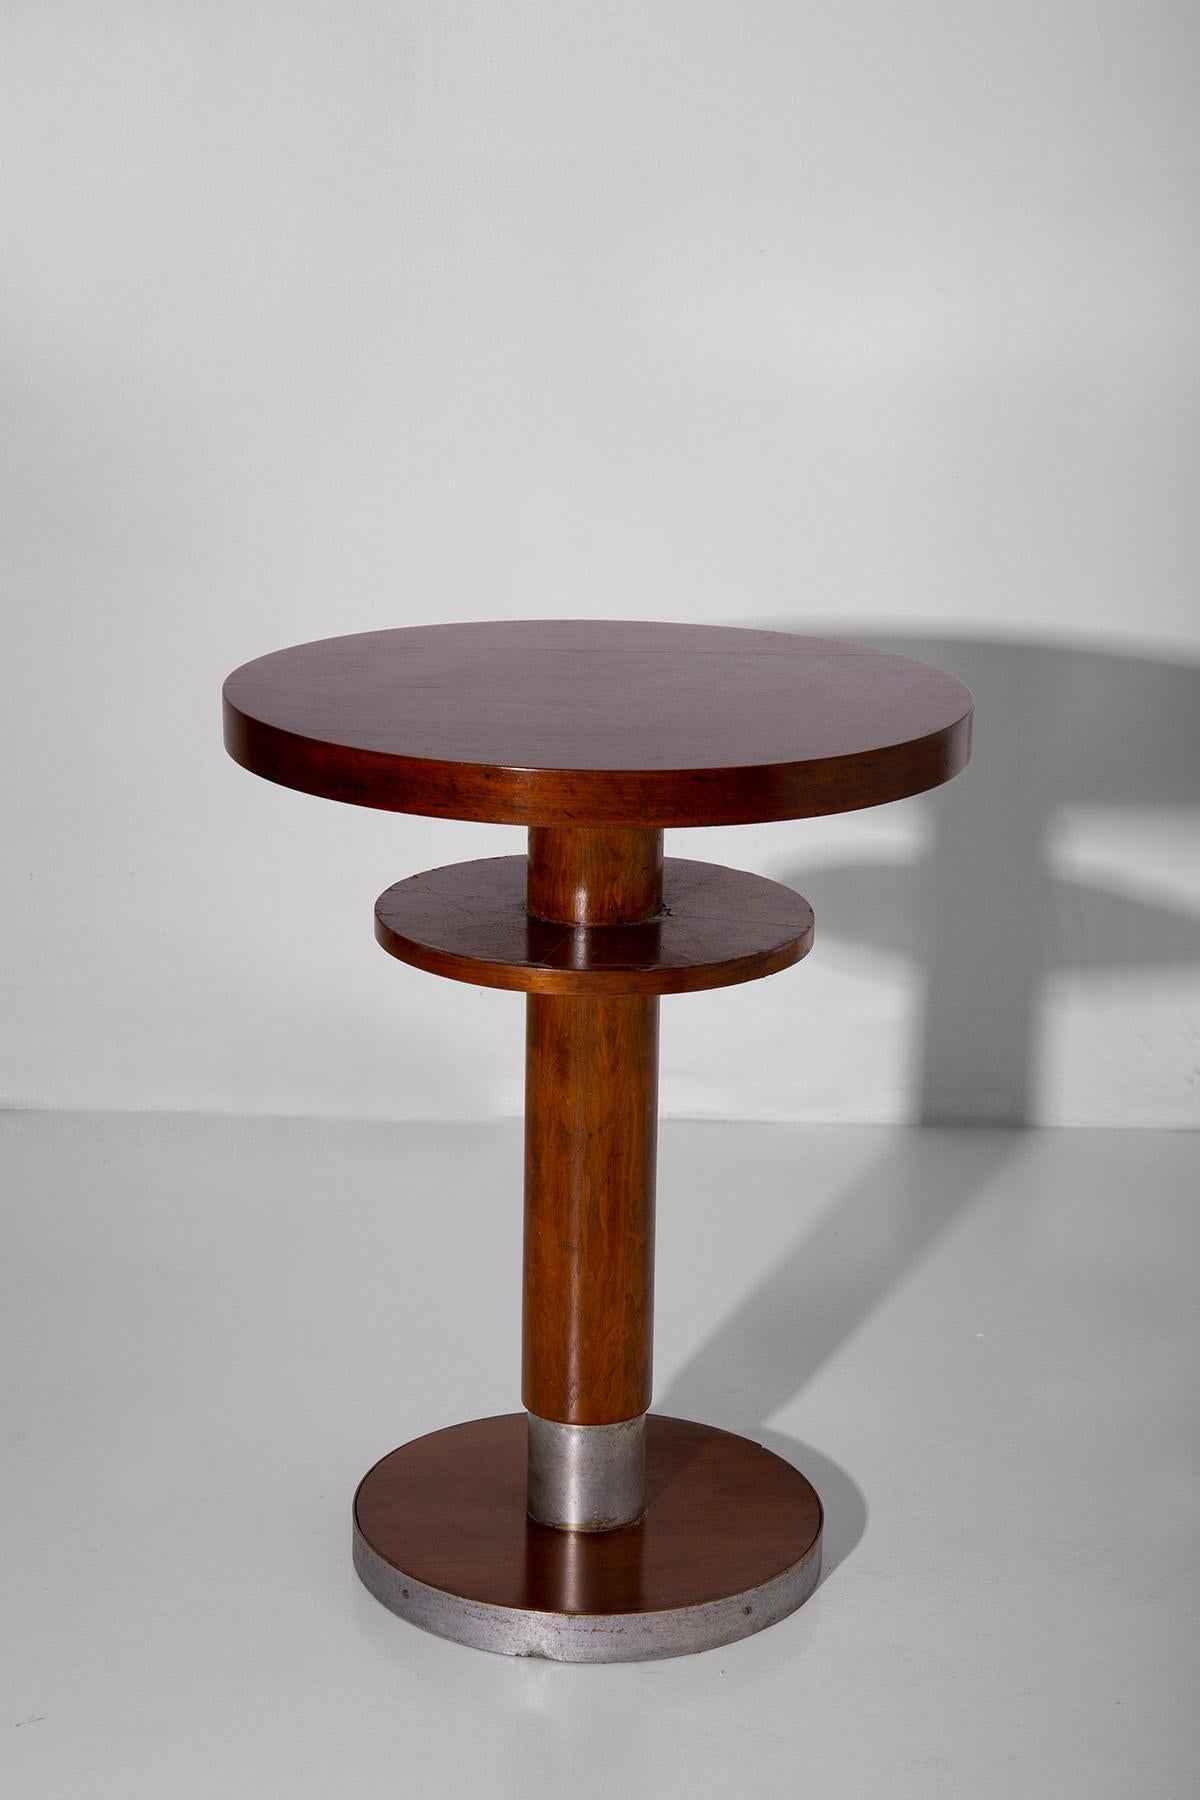 Metal Gio Ponti's ship's side table for the liner Bianca Mano, published  For Sale